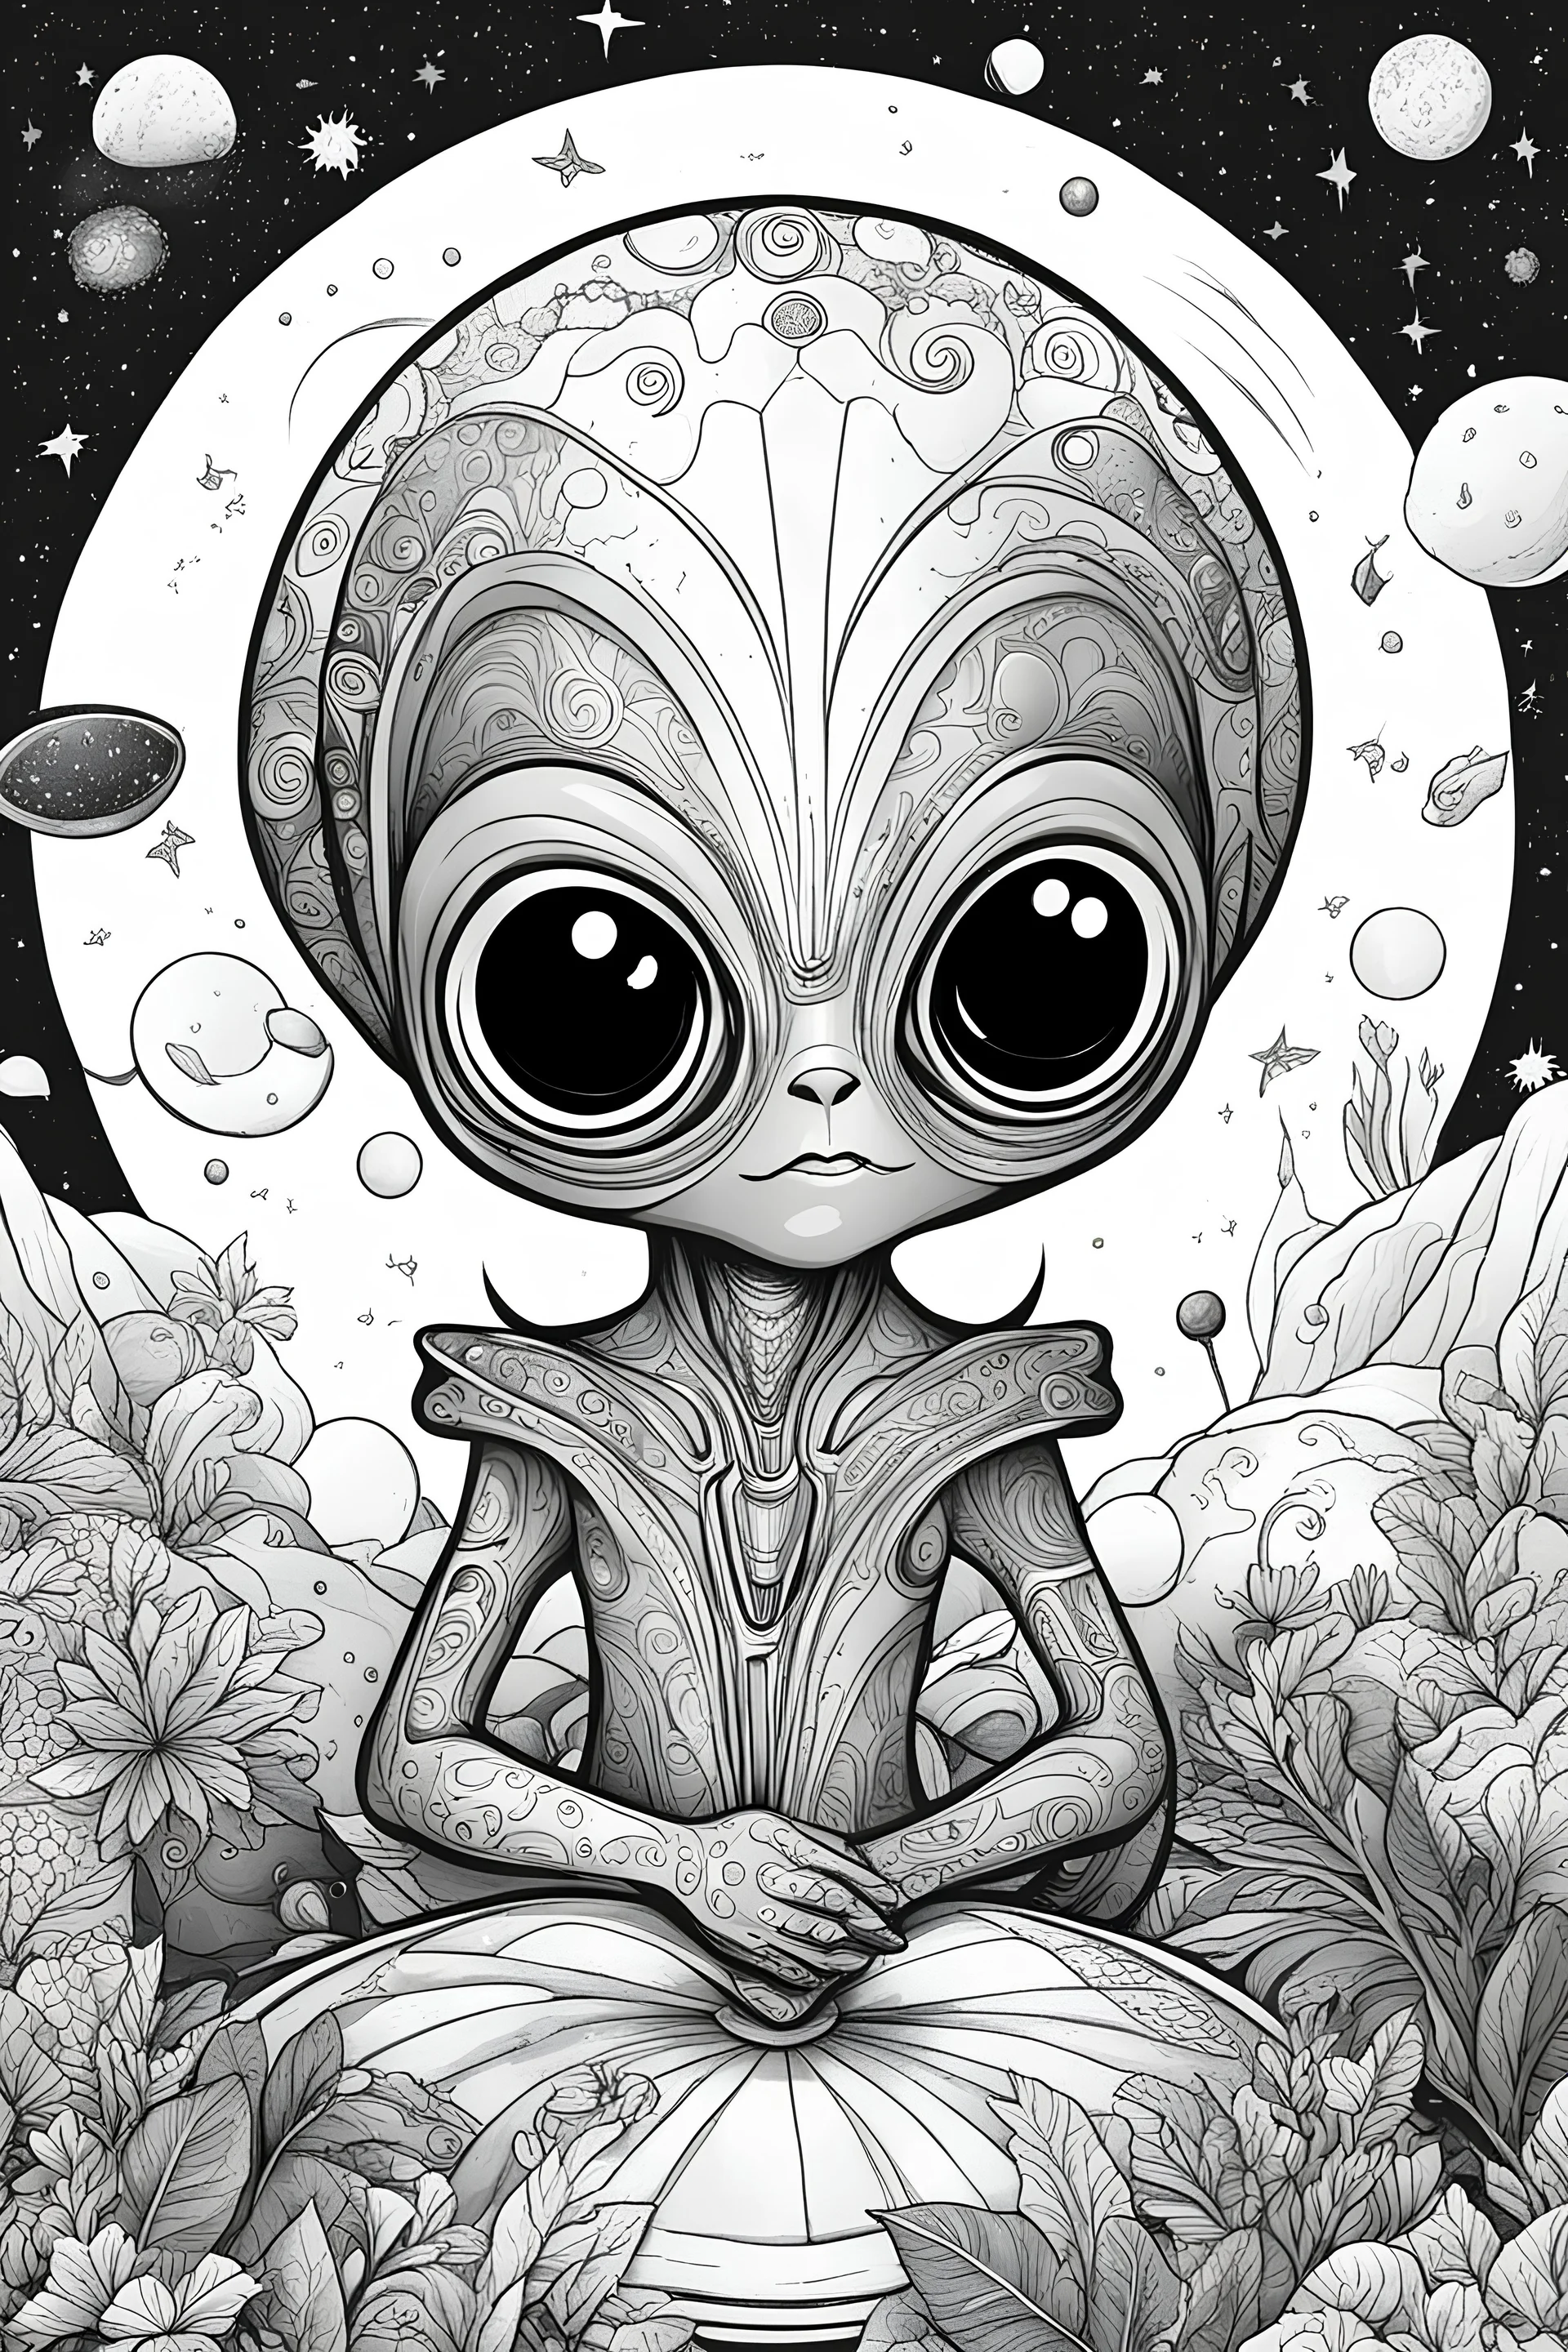 A Coloring Book image, white background, Illustrate an alien holiday, that celebrates unity among different species, a scenes of intergalactic feasts, music. doodling style, line art, clipart, high quality, simple line illustration, black and white, ultra detailed, highly detailed eyes and feet and fingers.